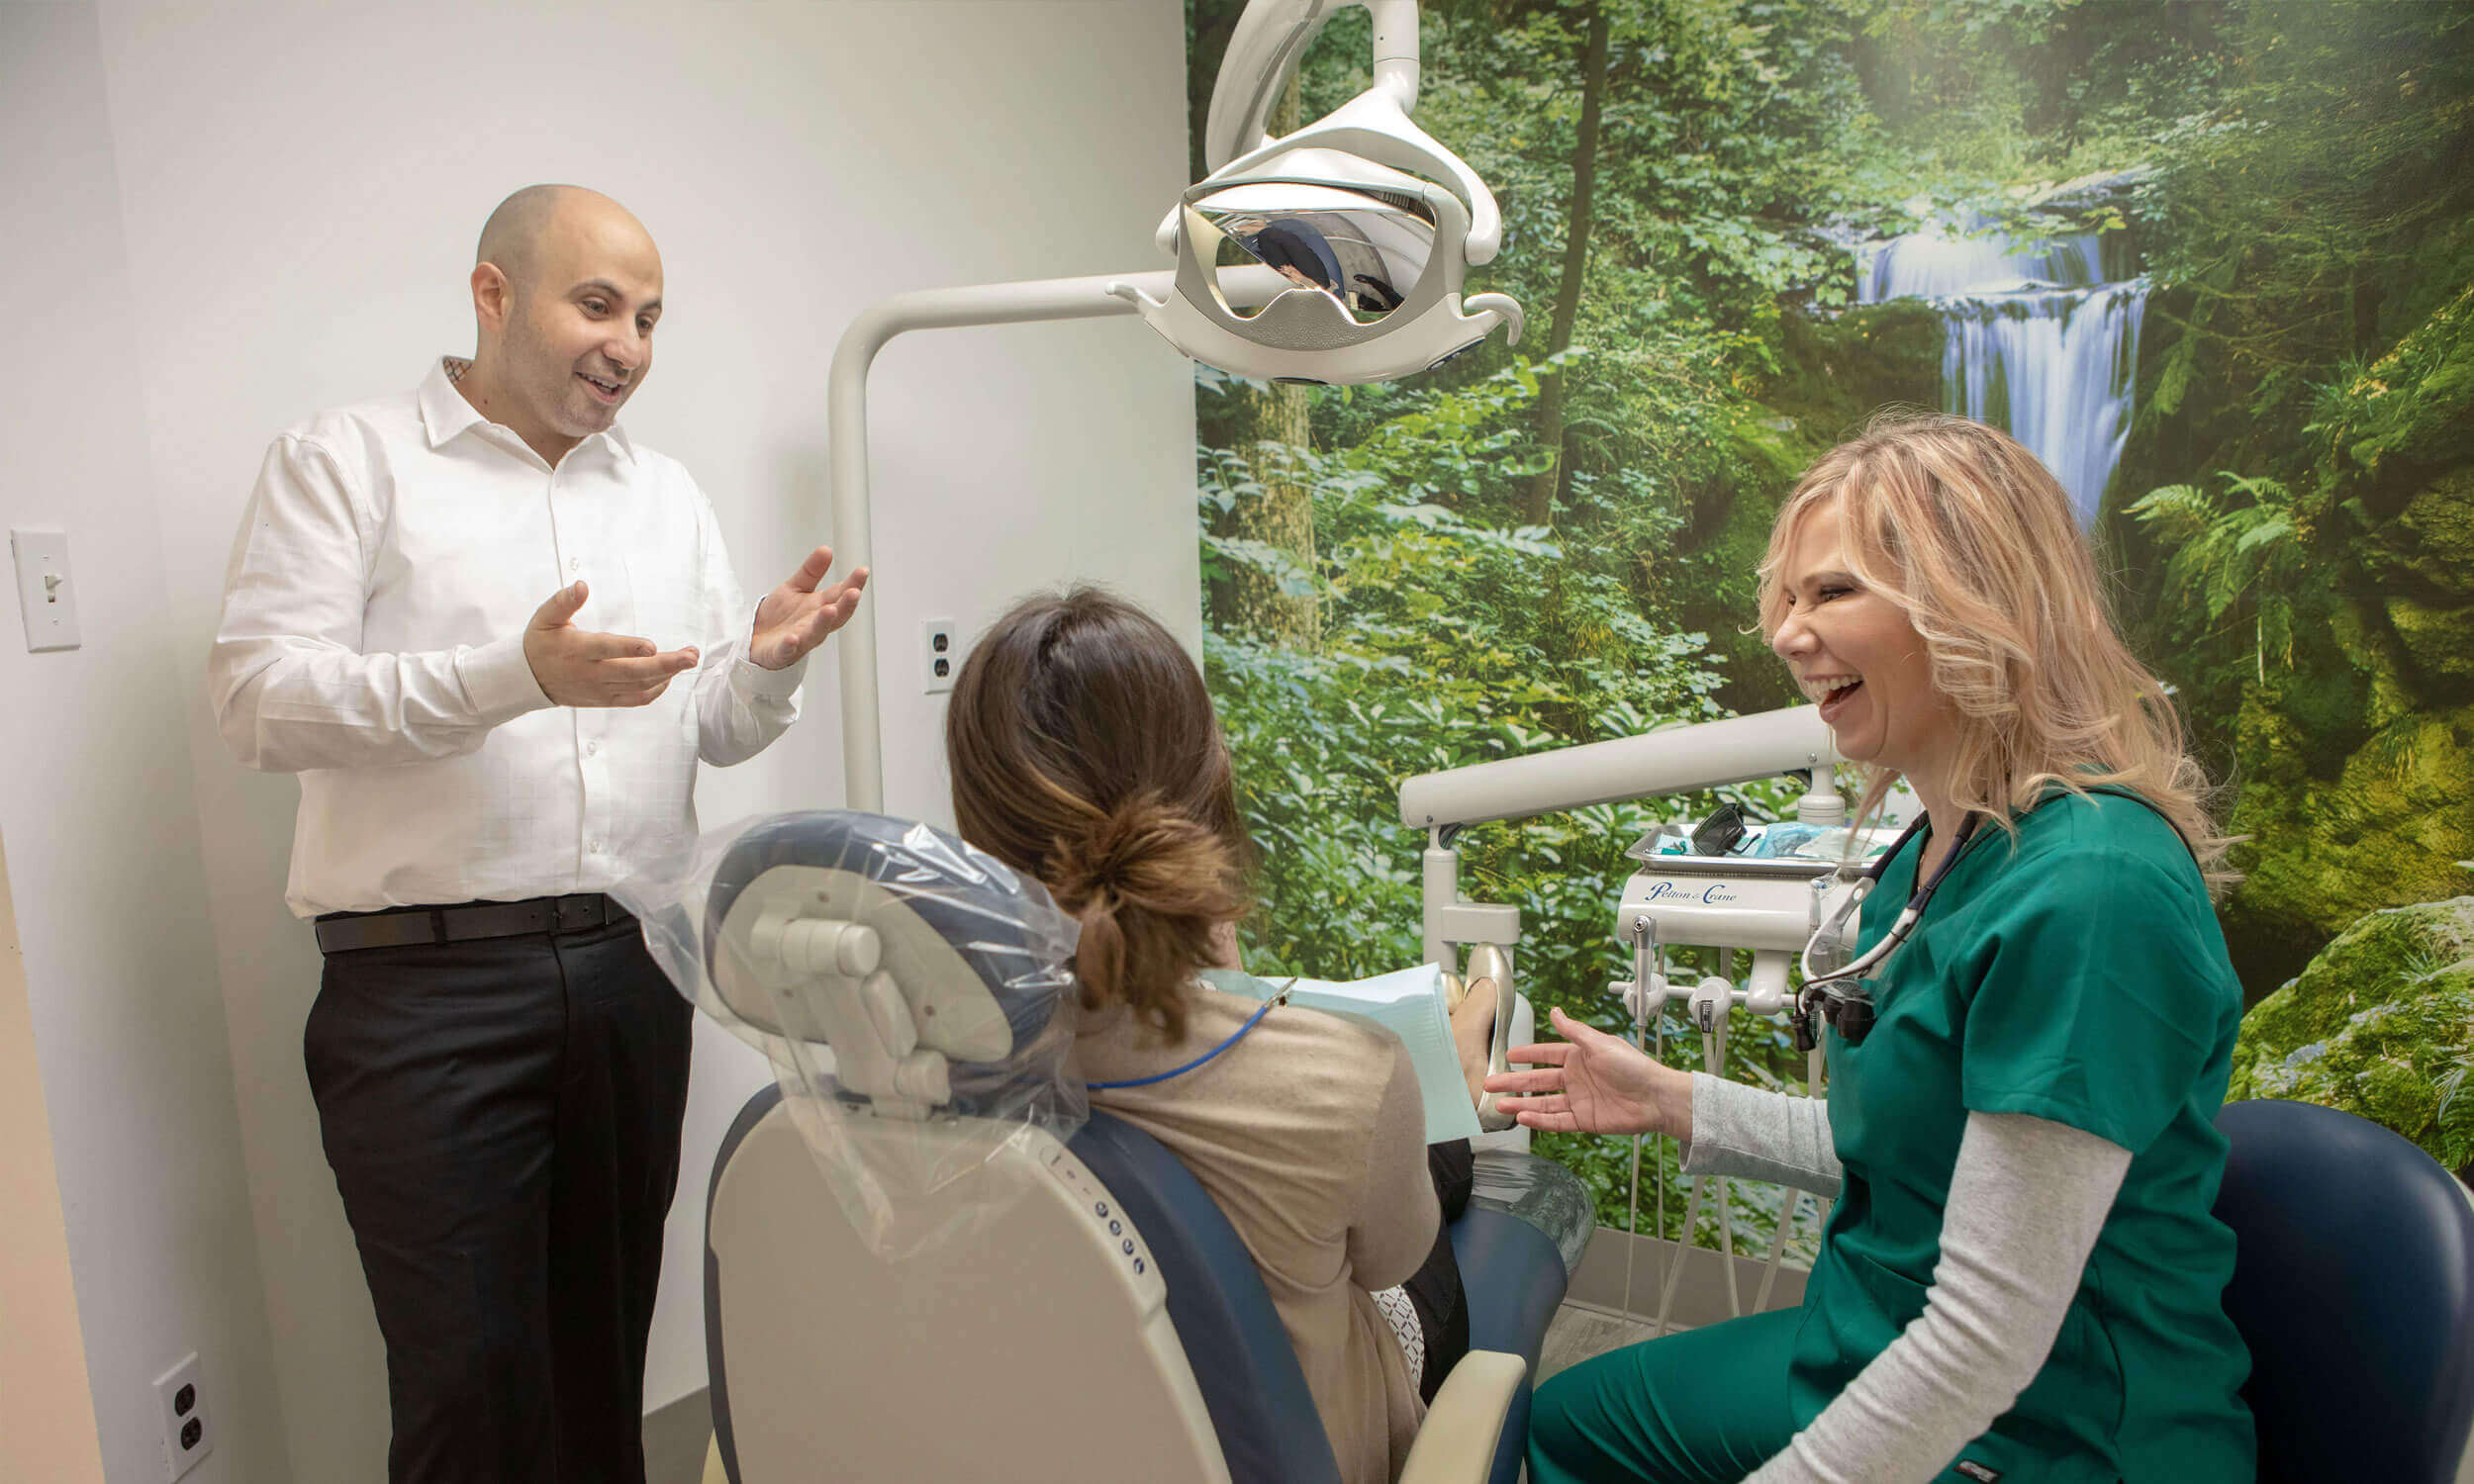 Dr. Dahman and assistant laughing with a patient